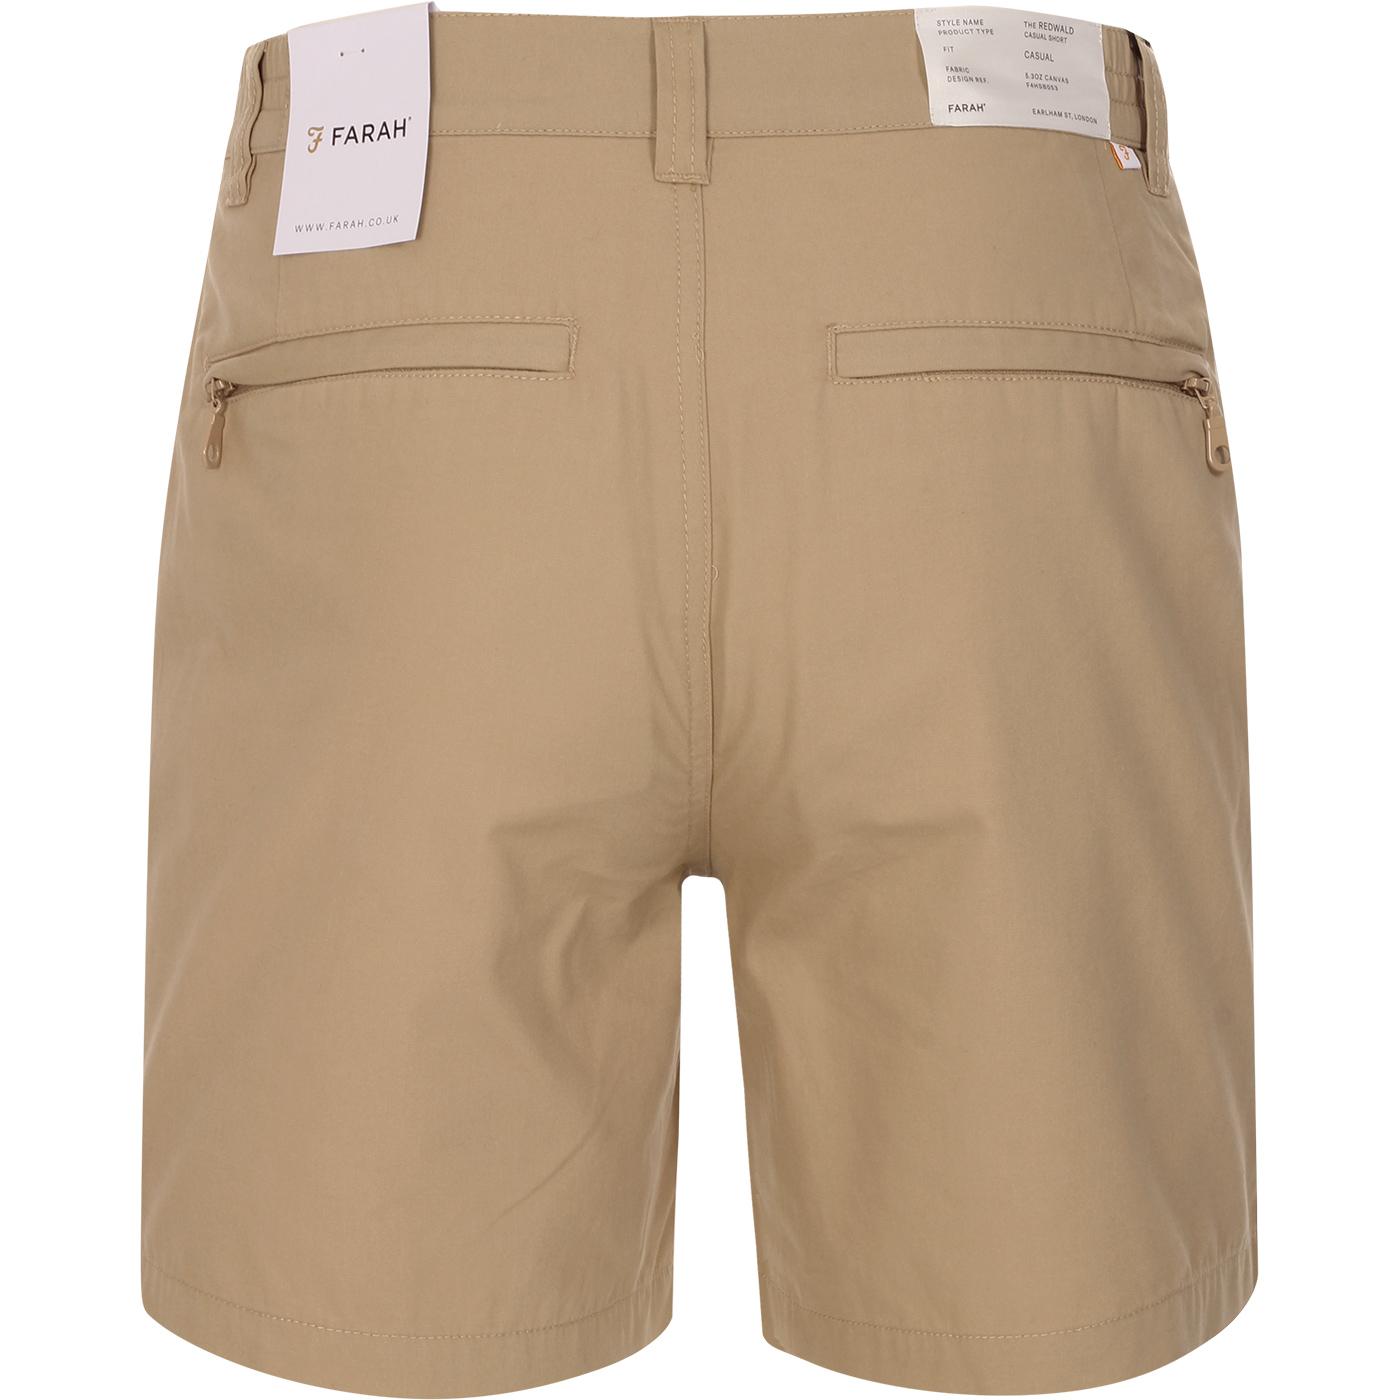 Redwald FARAH Men's Tailored Retro Rugby Shorts in Sand